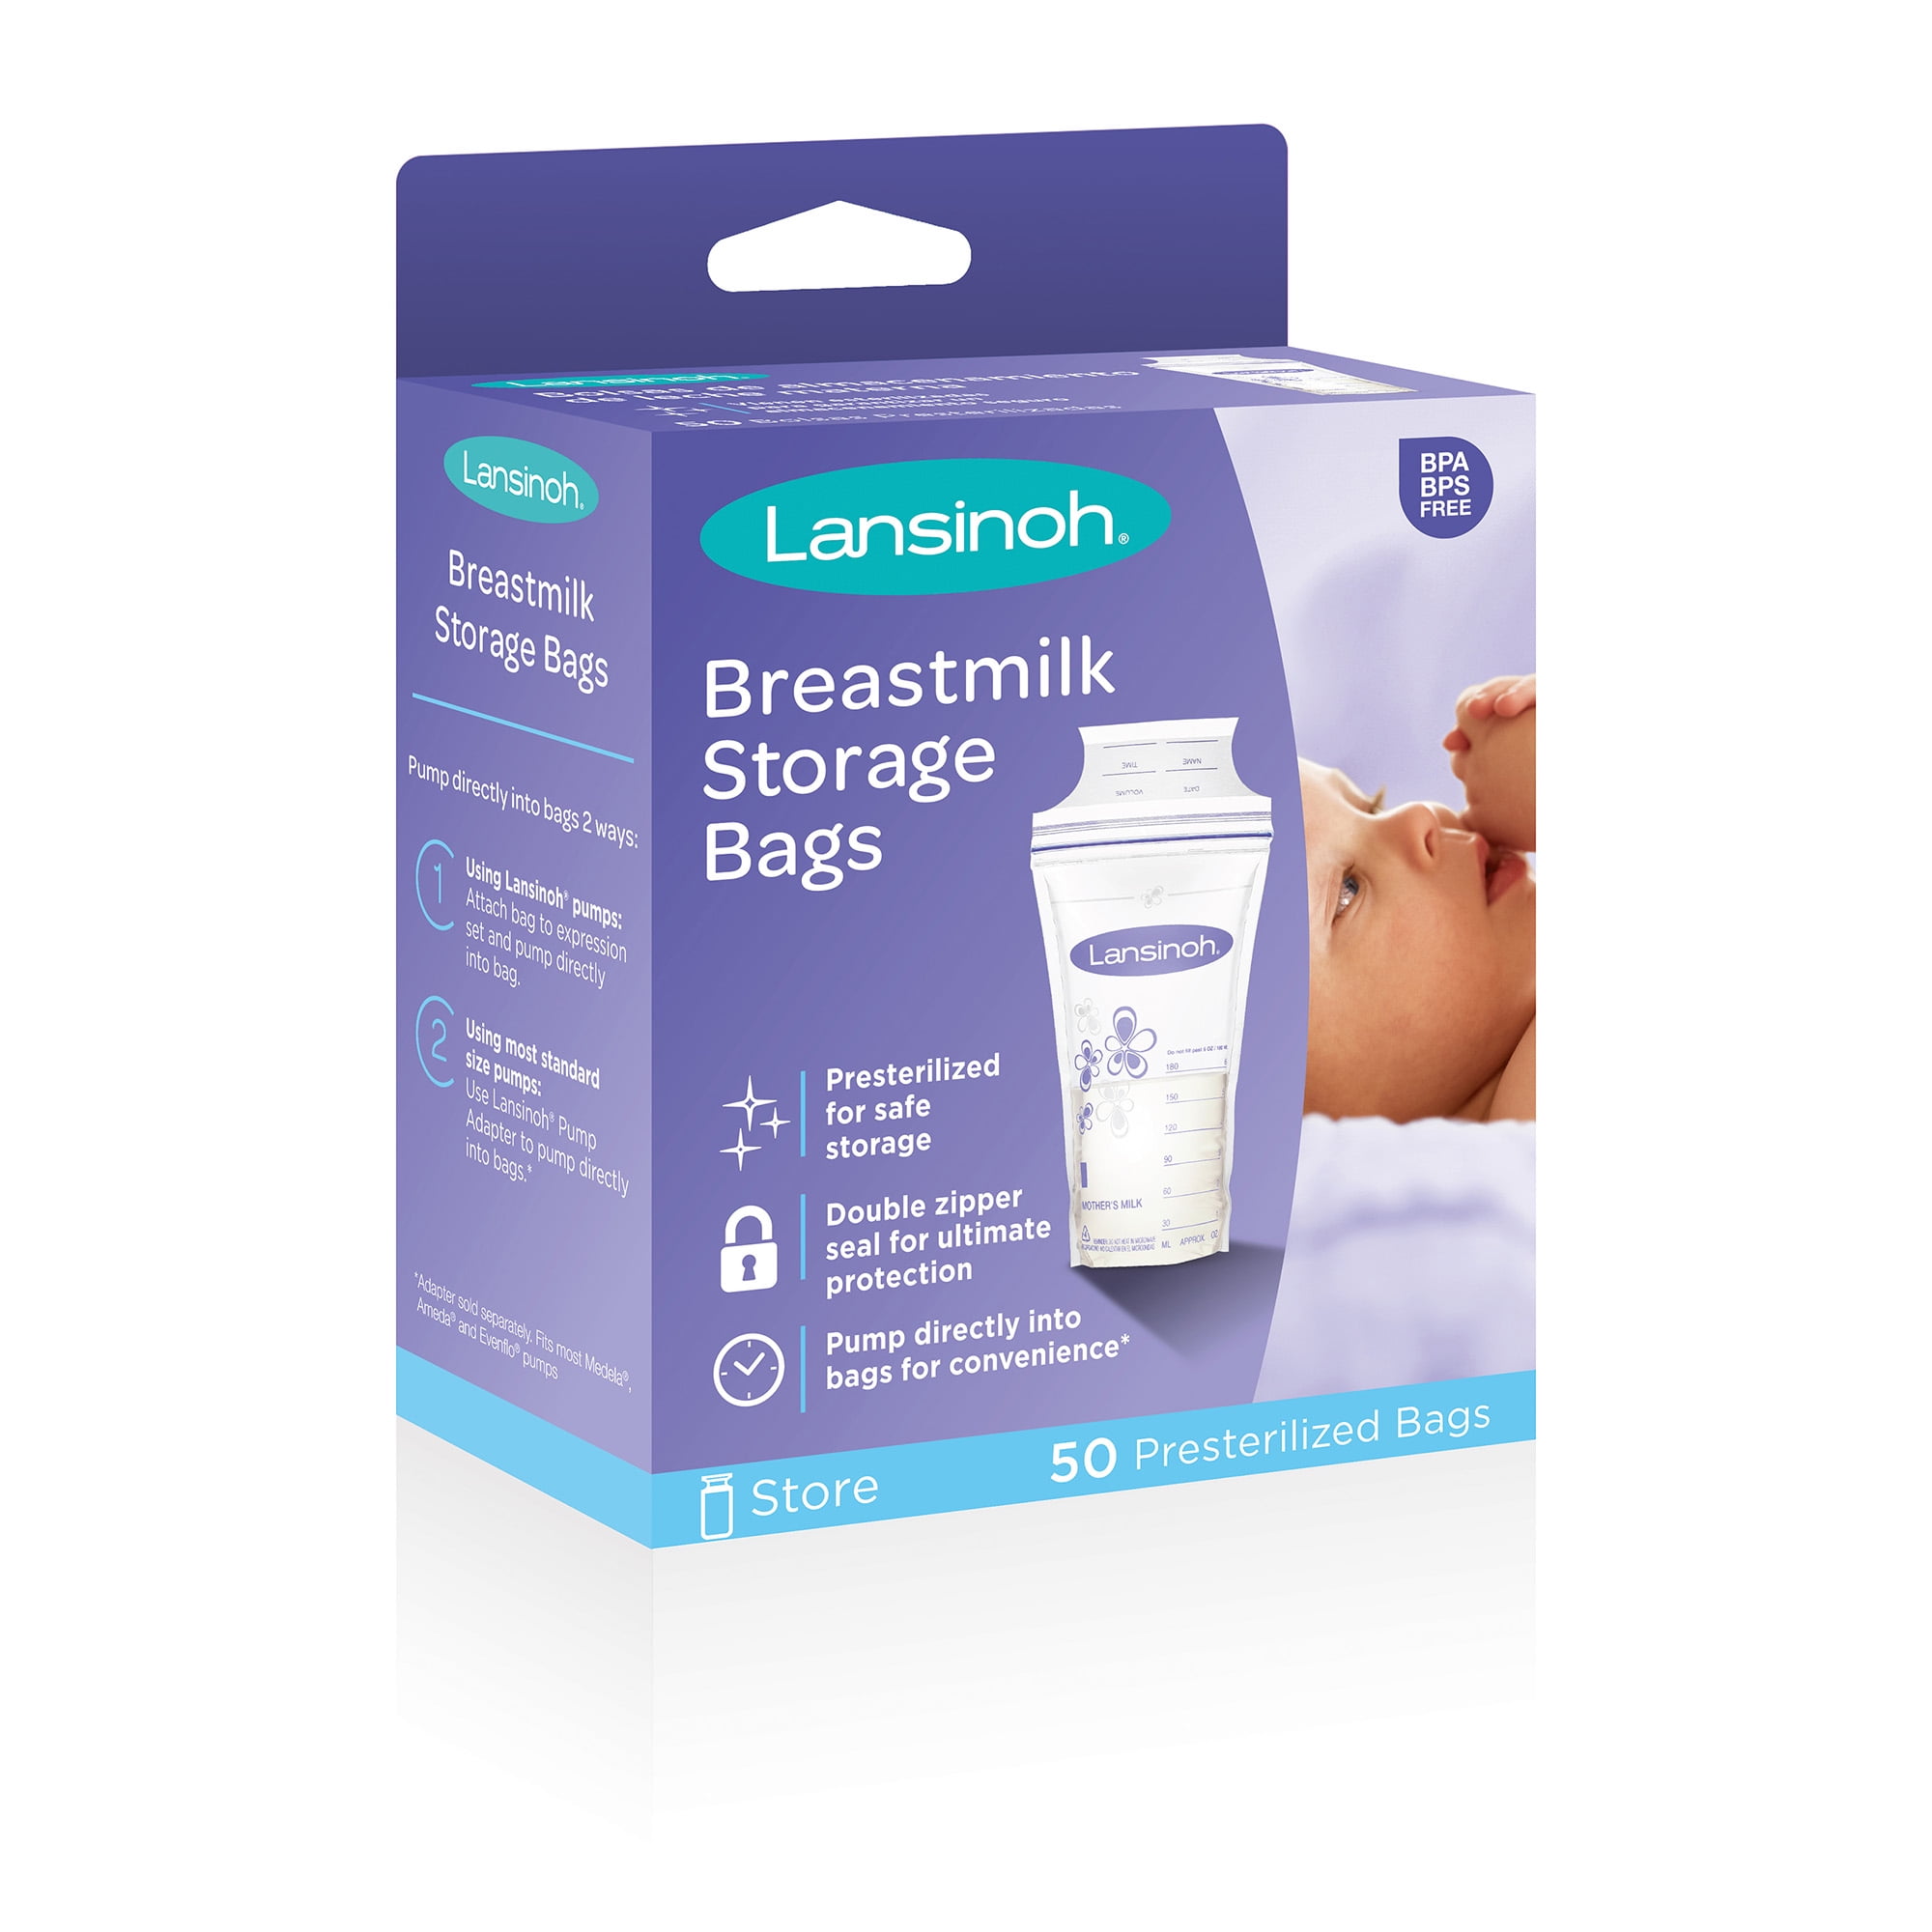 180 Count Value Pack Breast Milk Storage Bags Self Standing for Refrigeration and Freezing 7 Ounce BPA Free Only Available at Pre-Sterilized Leak Proof Double Zipper Seal 